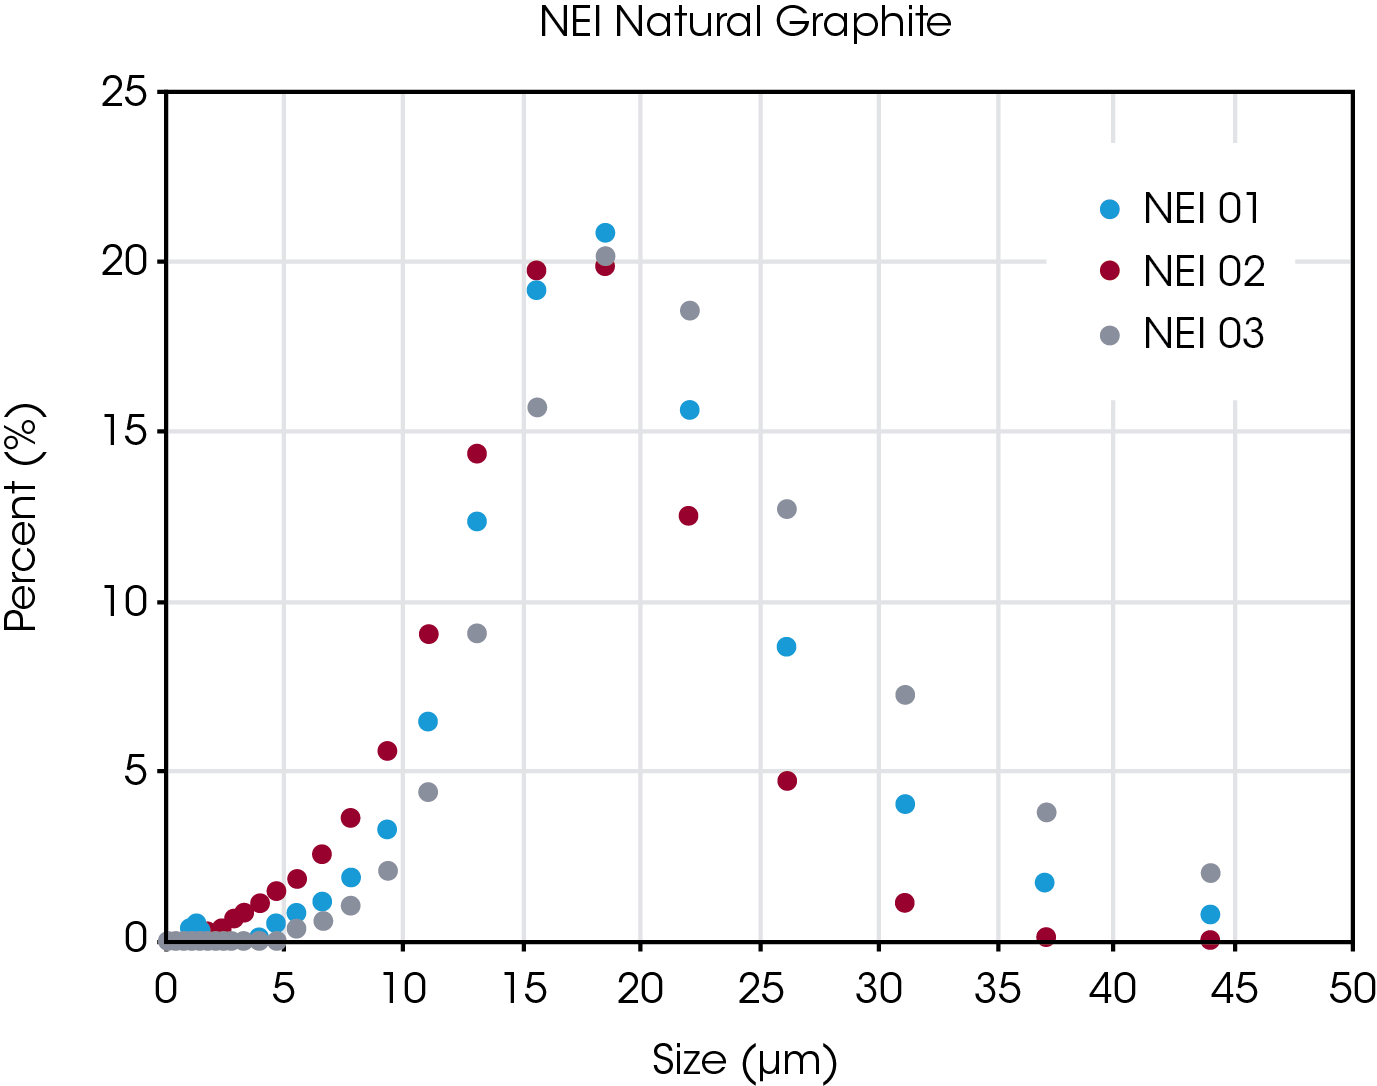 Figure 3. Particle size data for each of the natural NEI graphite samples. A single point is used to represent each bar in the histogram to allow for a clear overlay of the data.